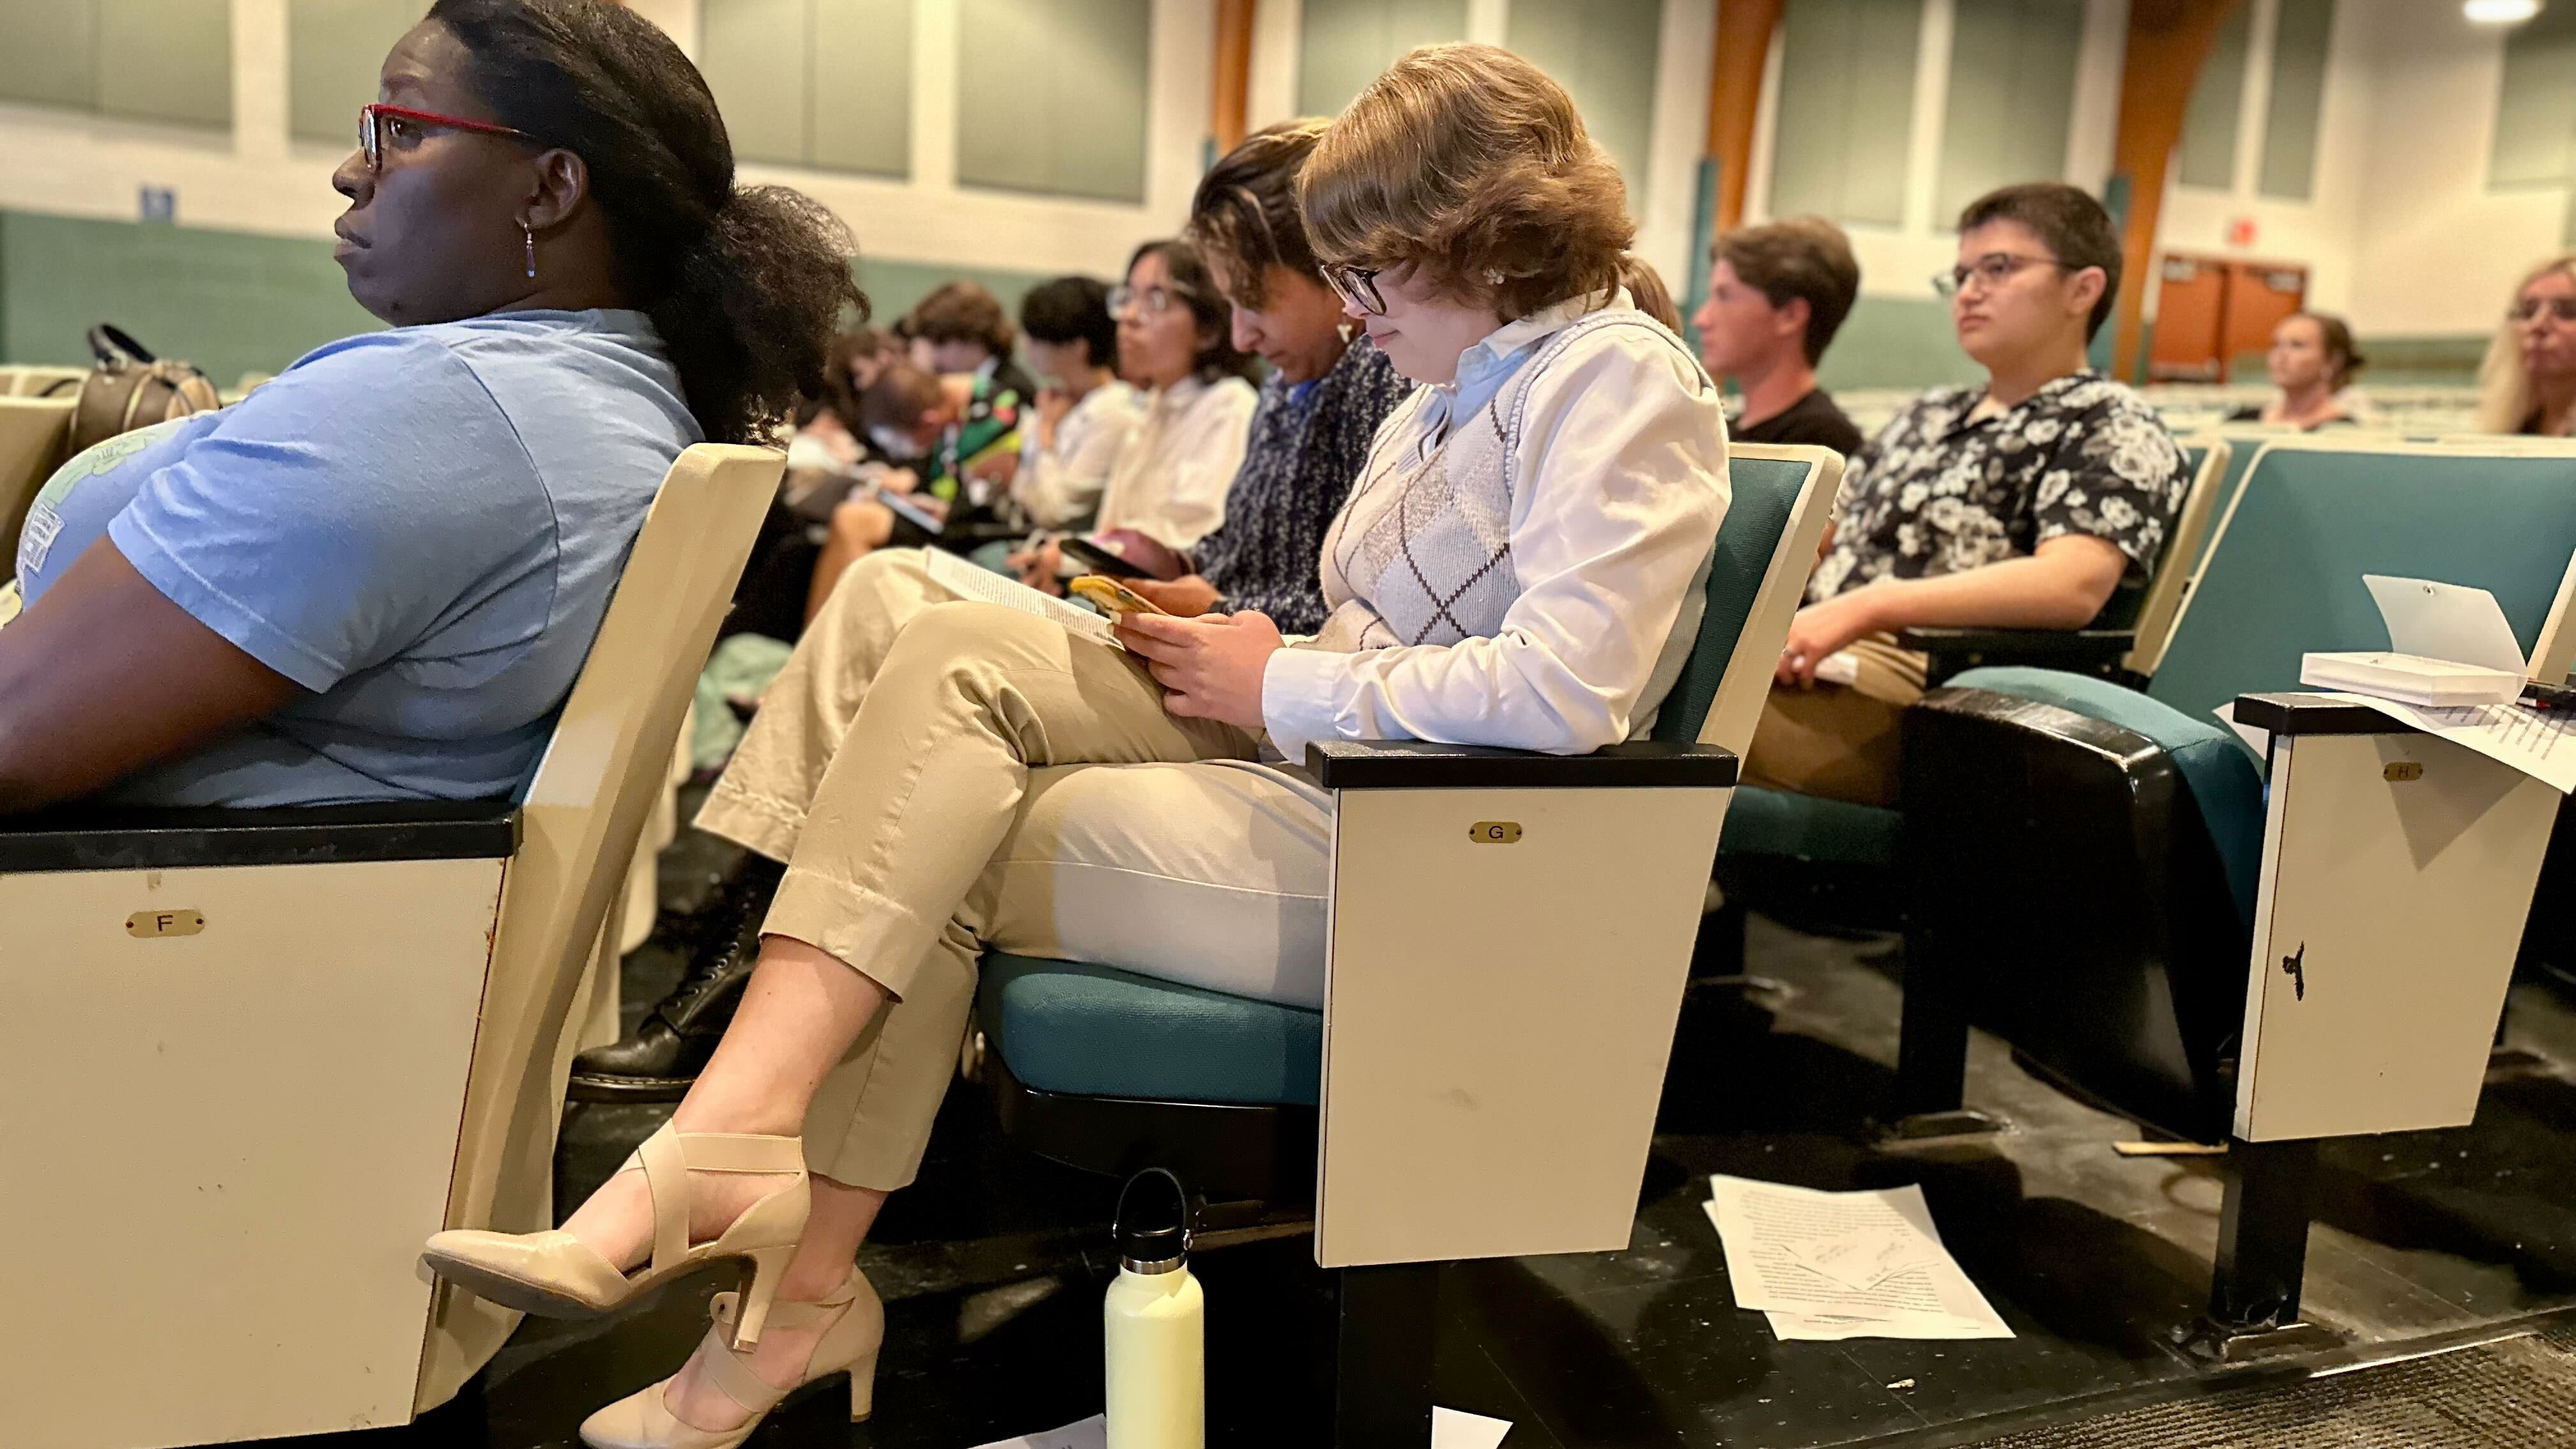 High school junior AJ Quartaro told the Virginia Beach School Board in August that they’re often misidentified and model policies about trans students could make it more common for LGBTQ students. (Photo by Mechelle Hankerson)